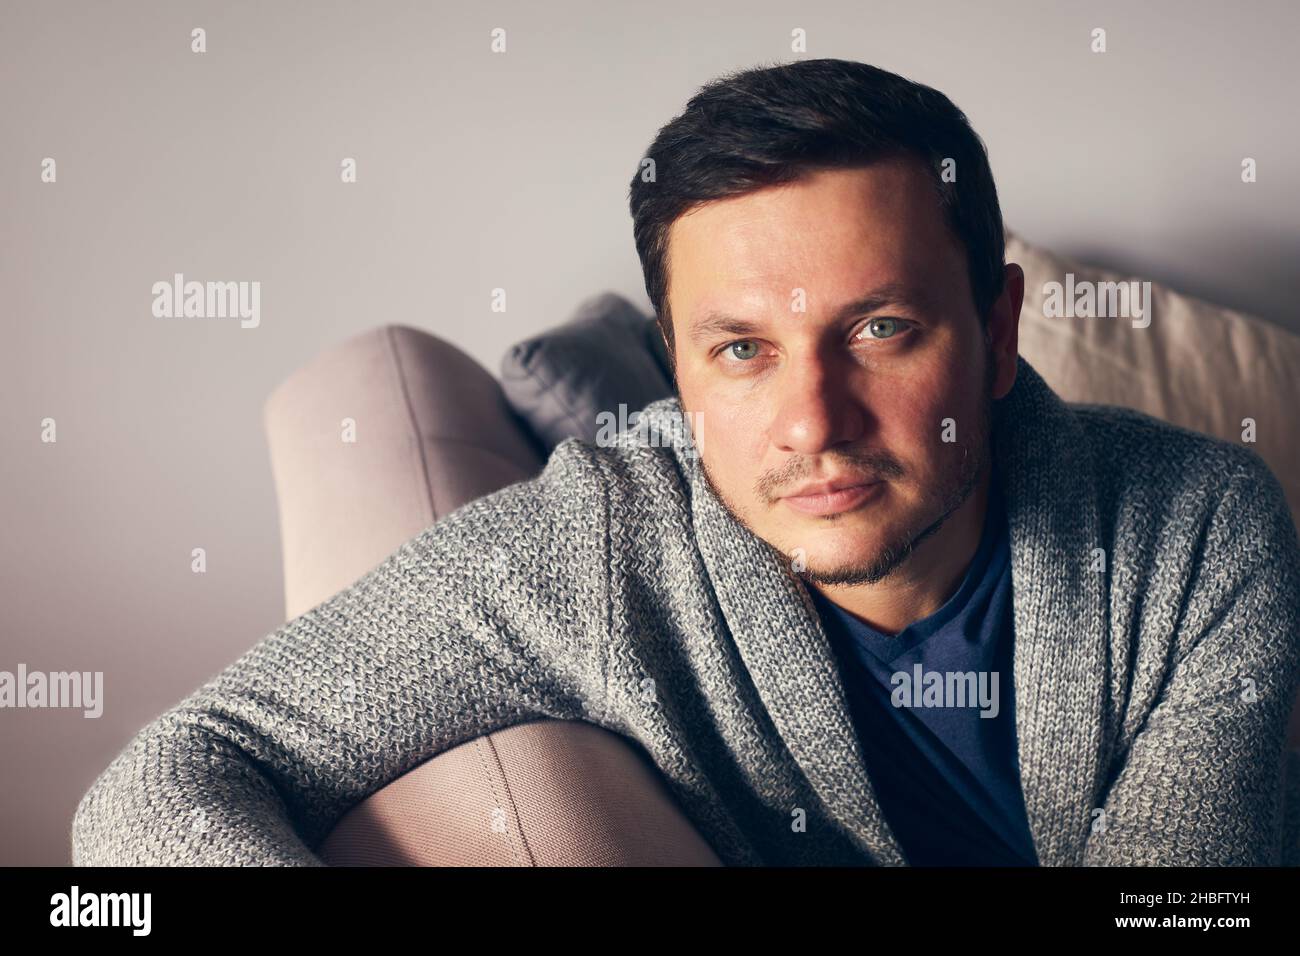 A portrait of man in a cardigan on a pink couch looks into the camera. Front view portrait.  Stock Photo